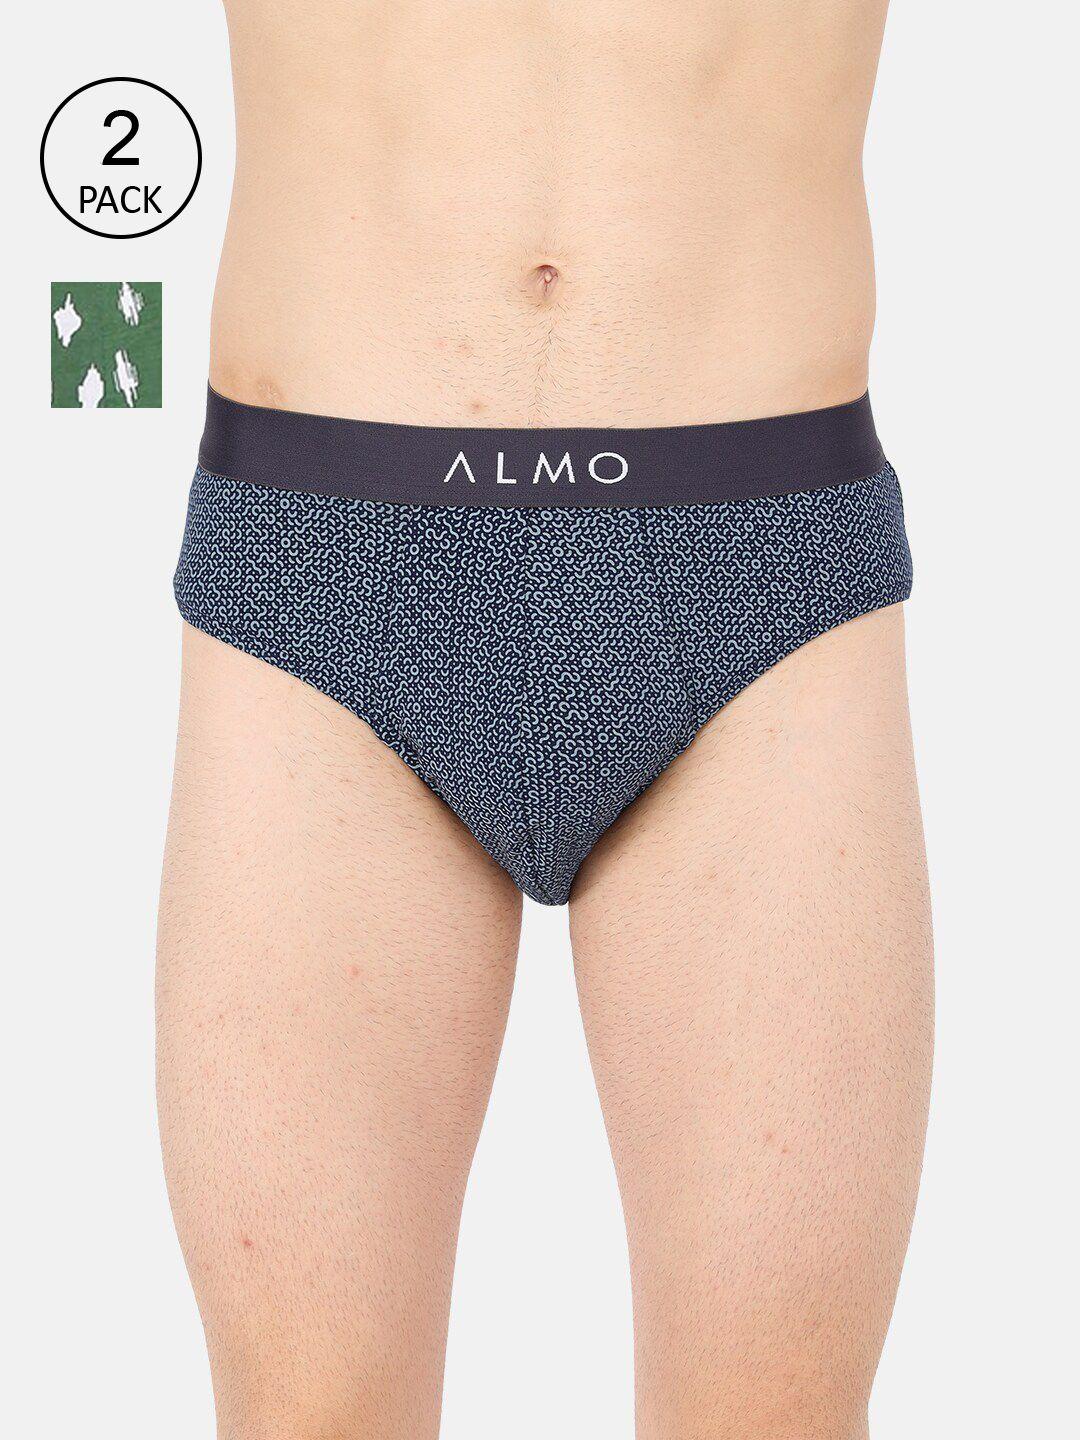 almo wear men pack of 2 navy blue printed organic cotton basic briefs